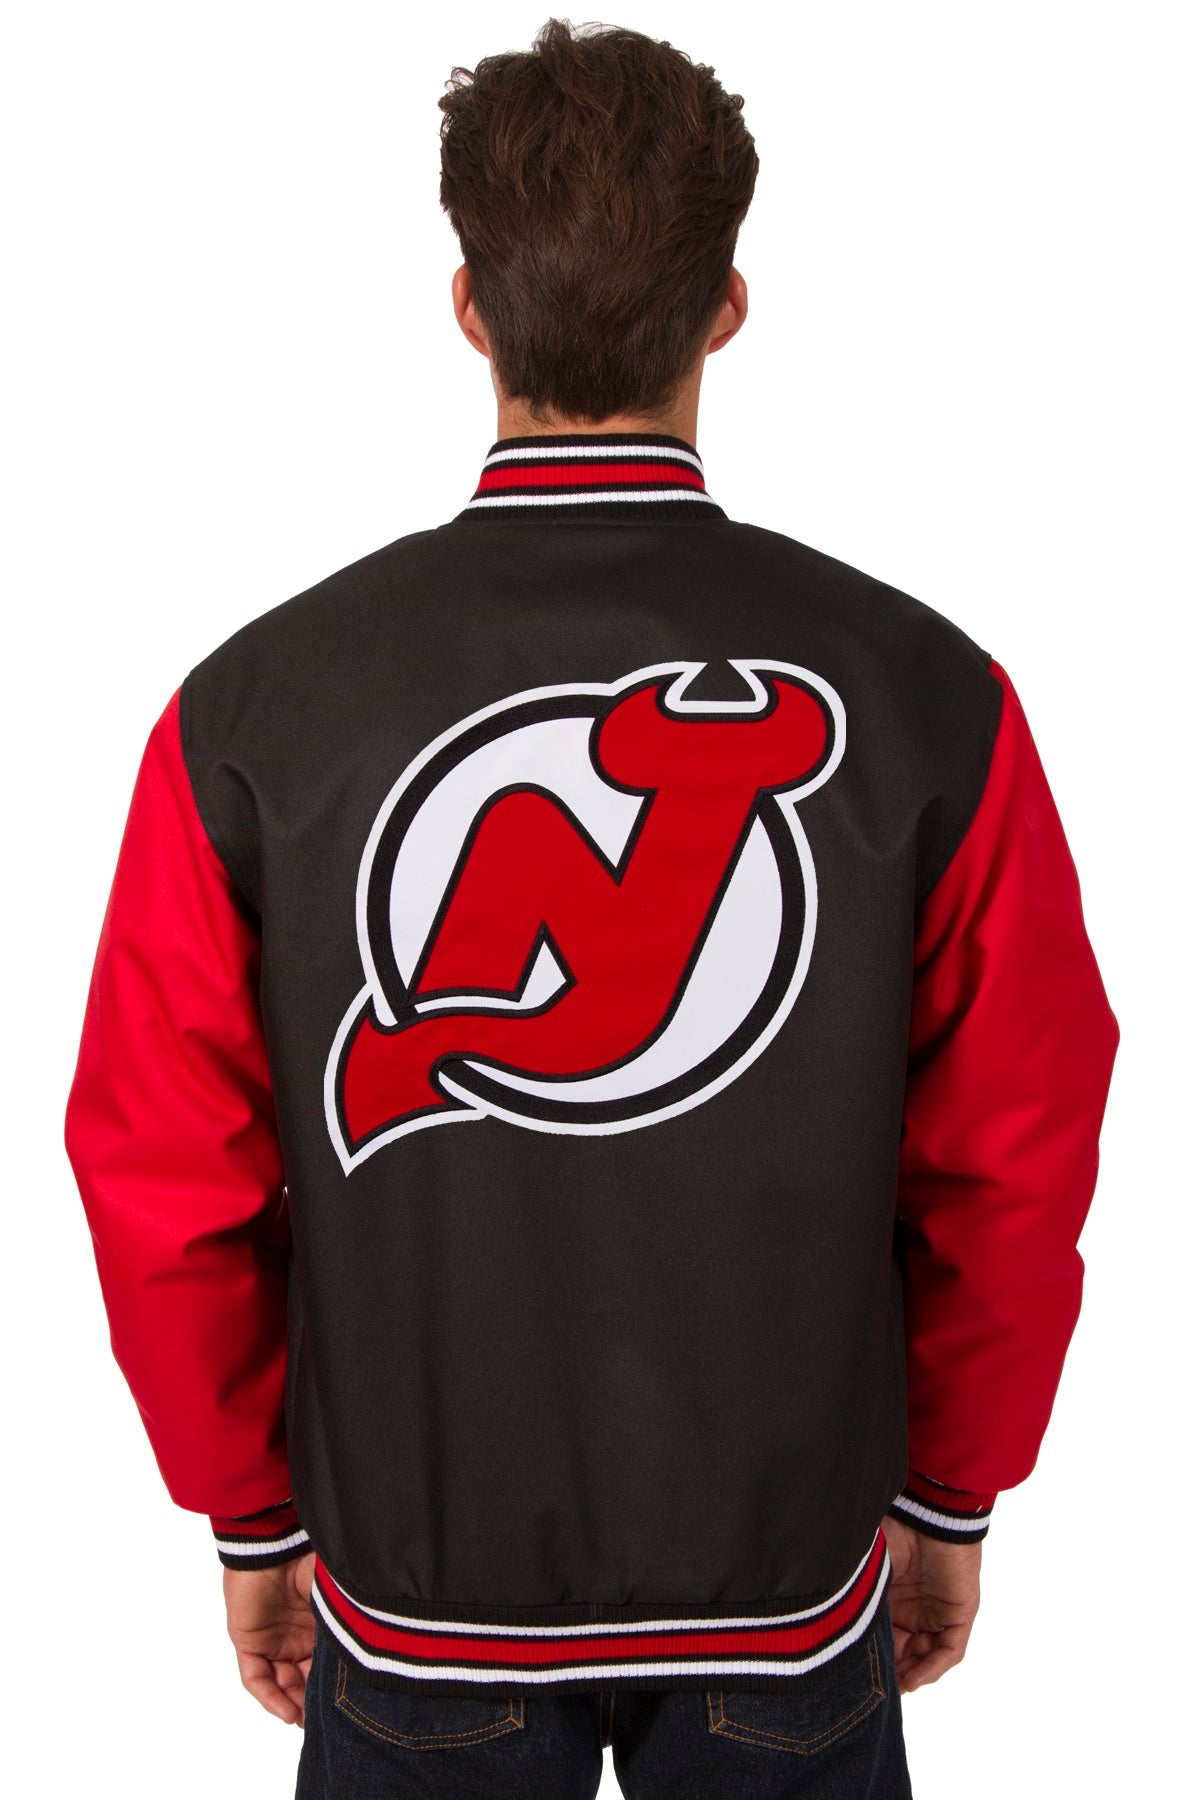 New Jersey Devils Poly-Twill Jacket (Front and Back Logo)